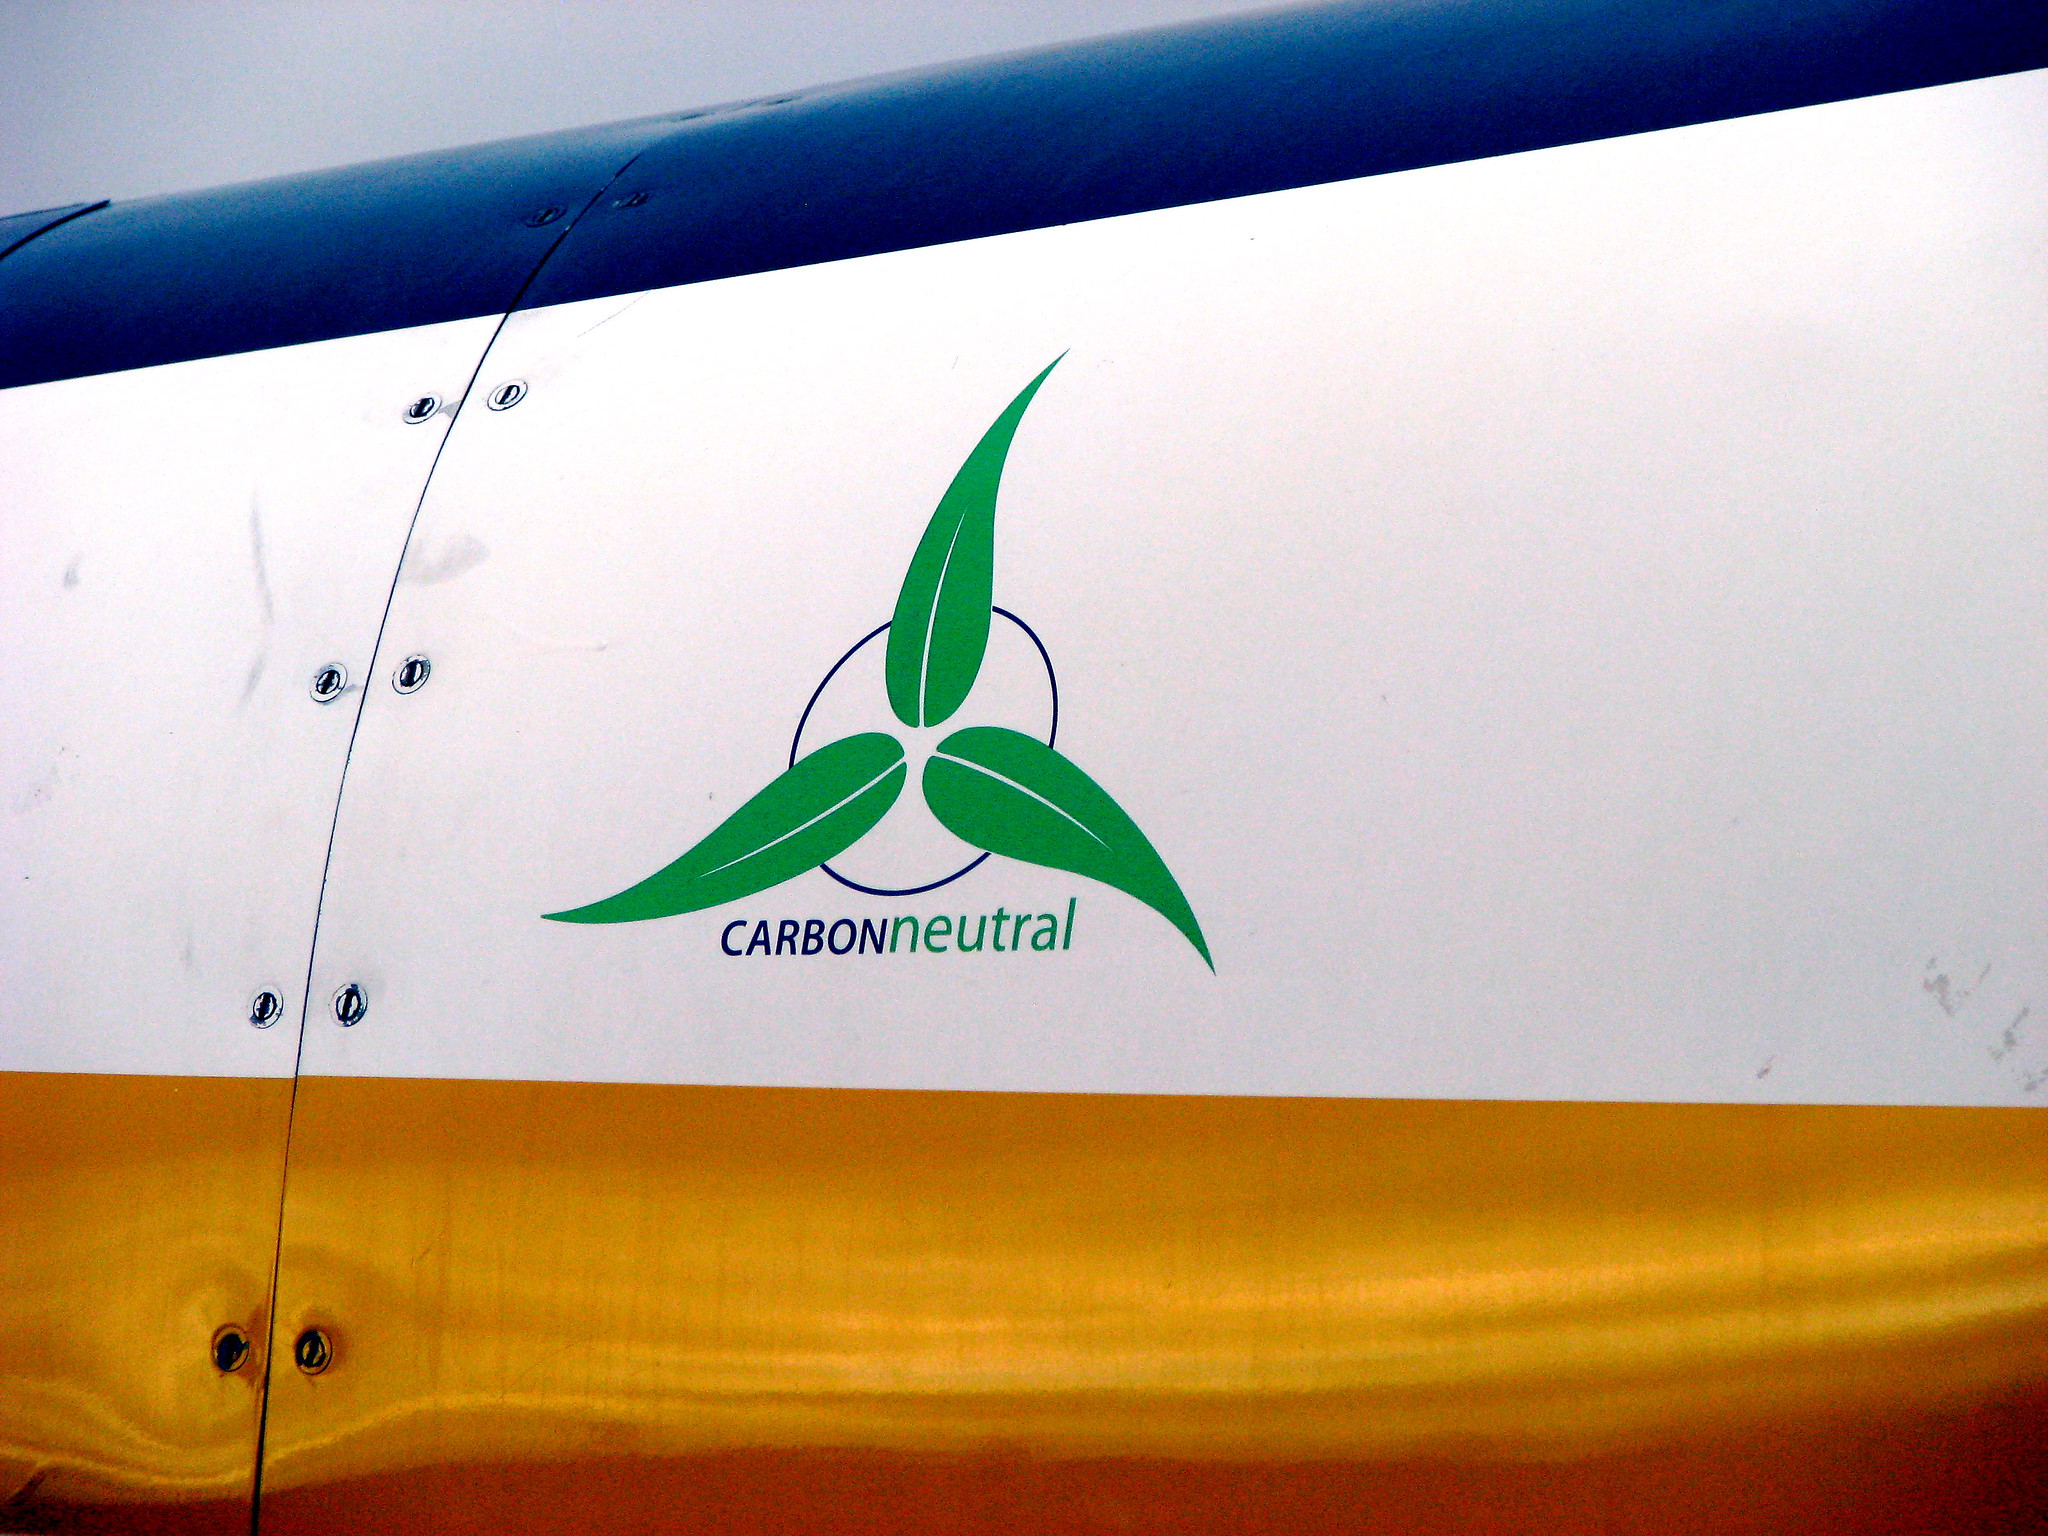 A symbol saying "carbon neutral" on the side of a sea plane.